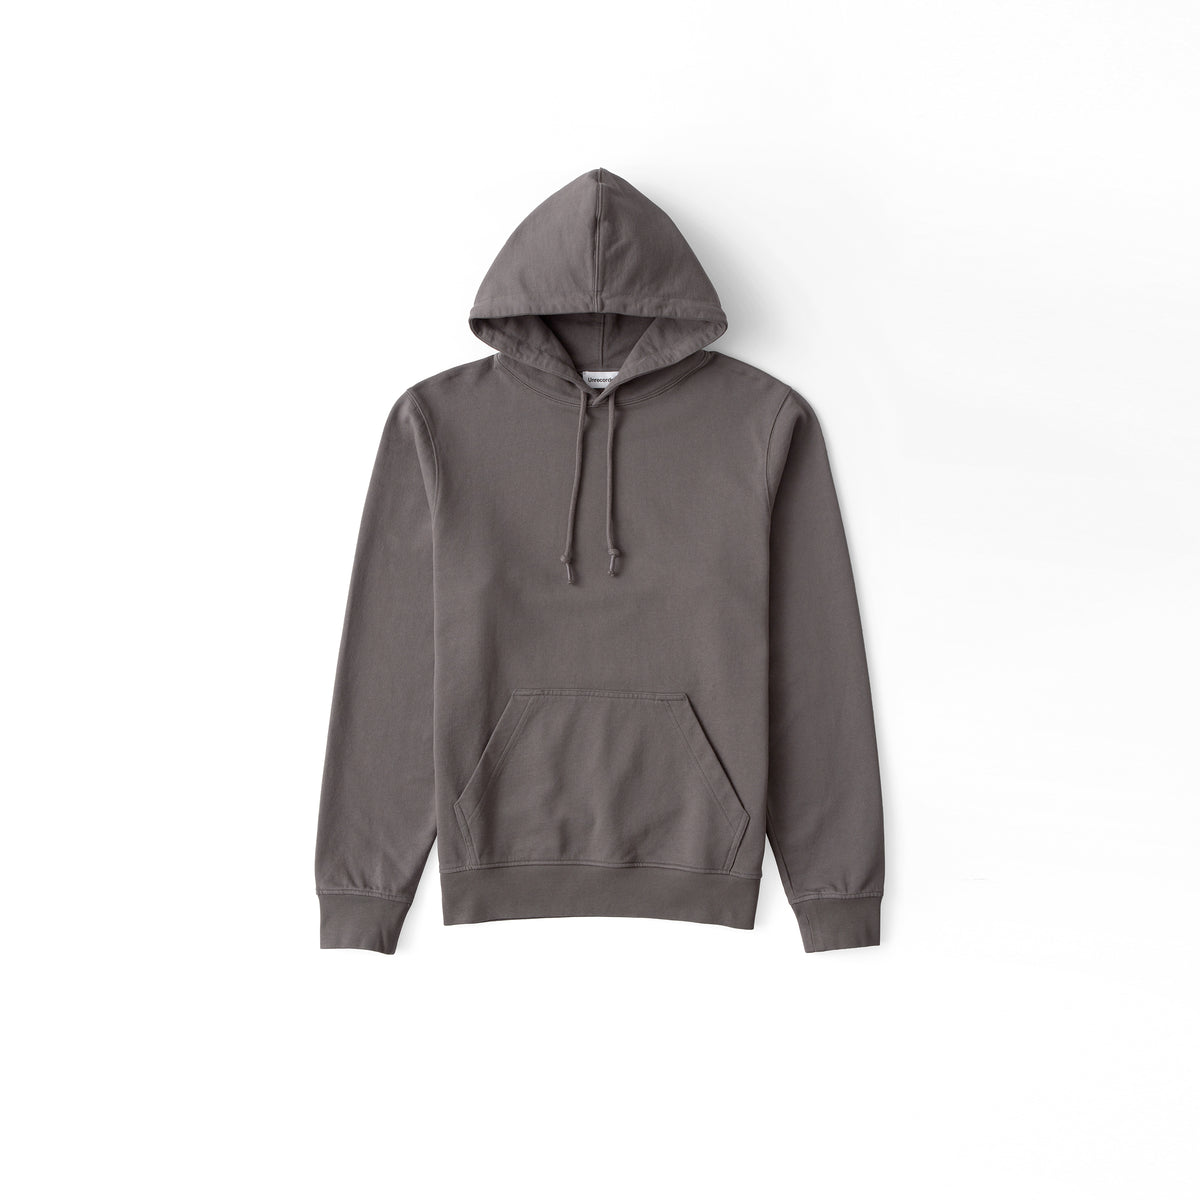 Hoodie in Charcoal made from organic cotton - Front Men - Only Men